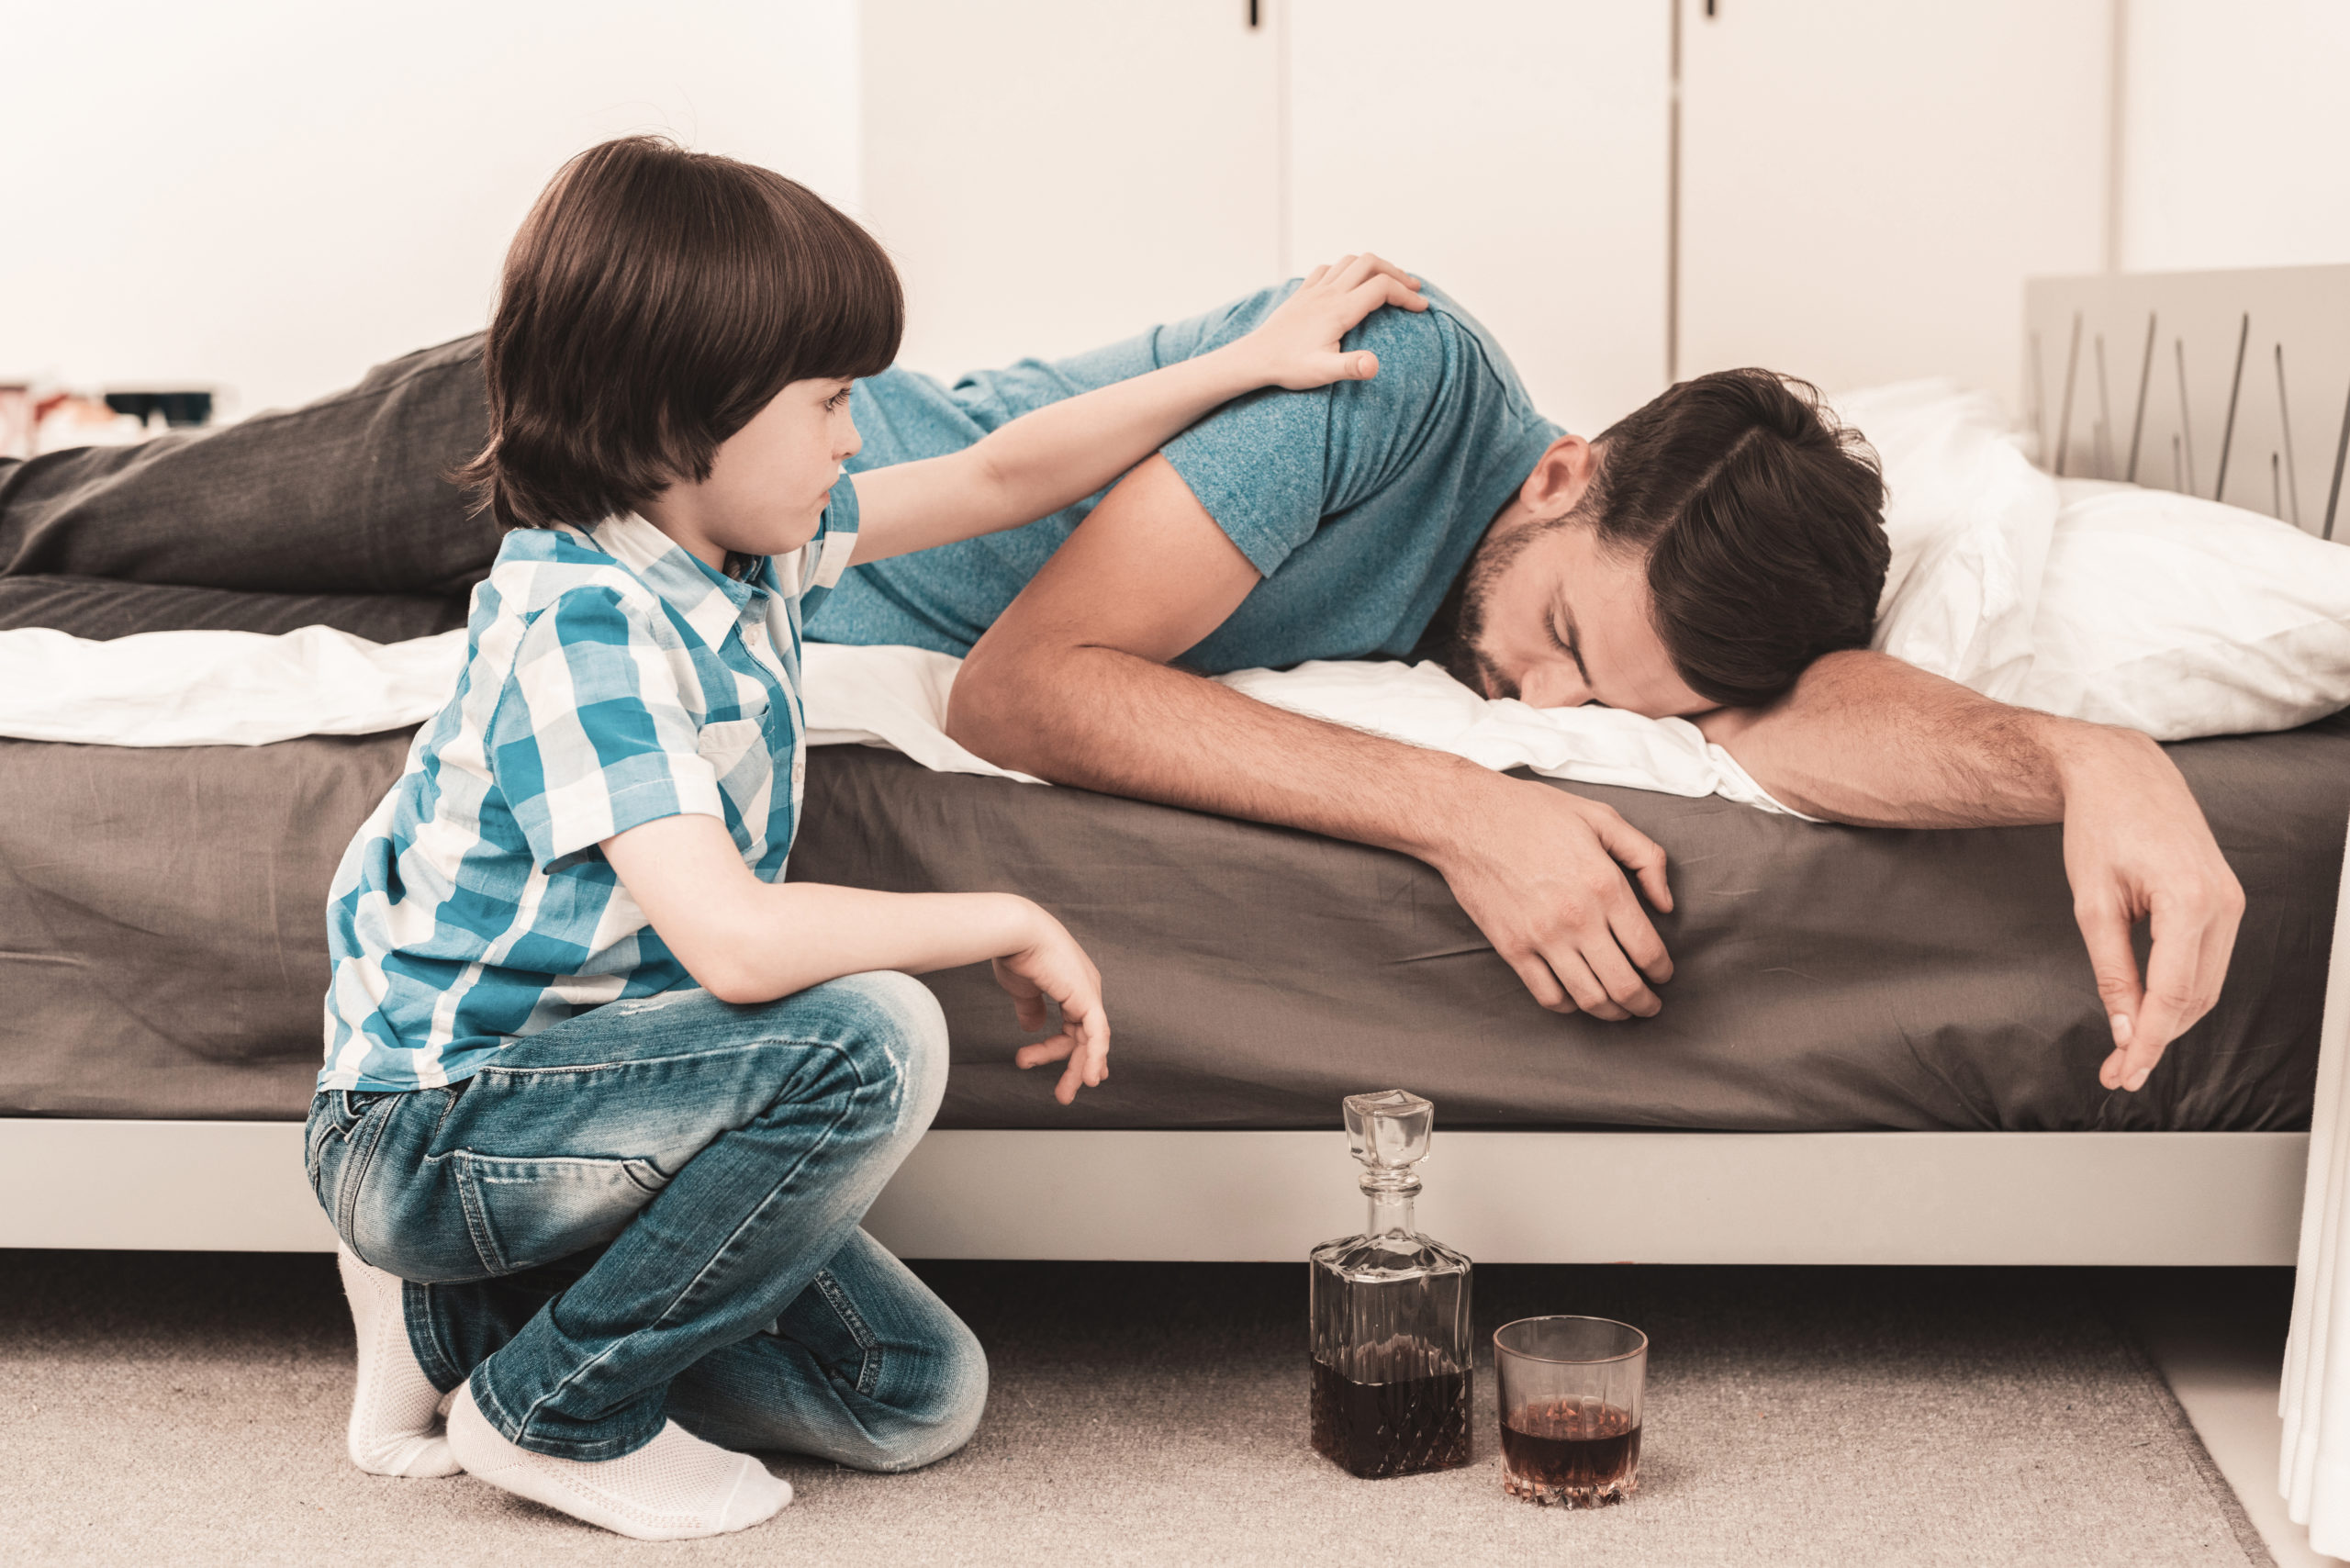 New Research On The Children Of Alcoholics